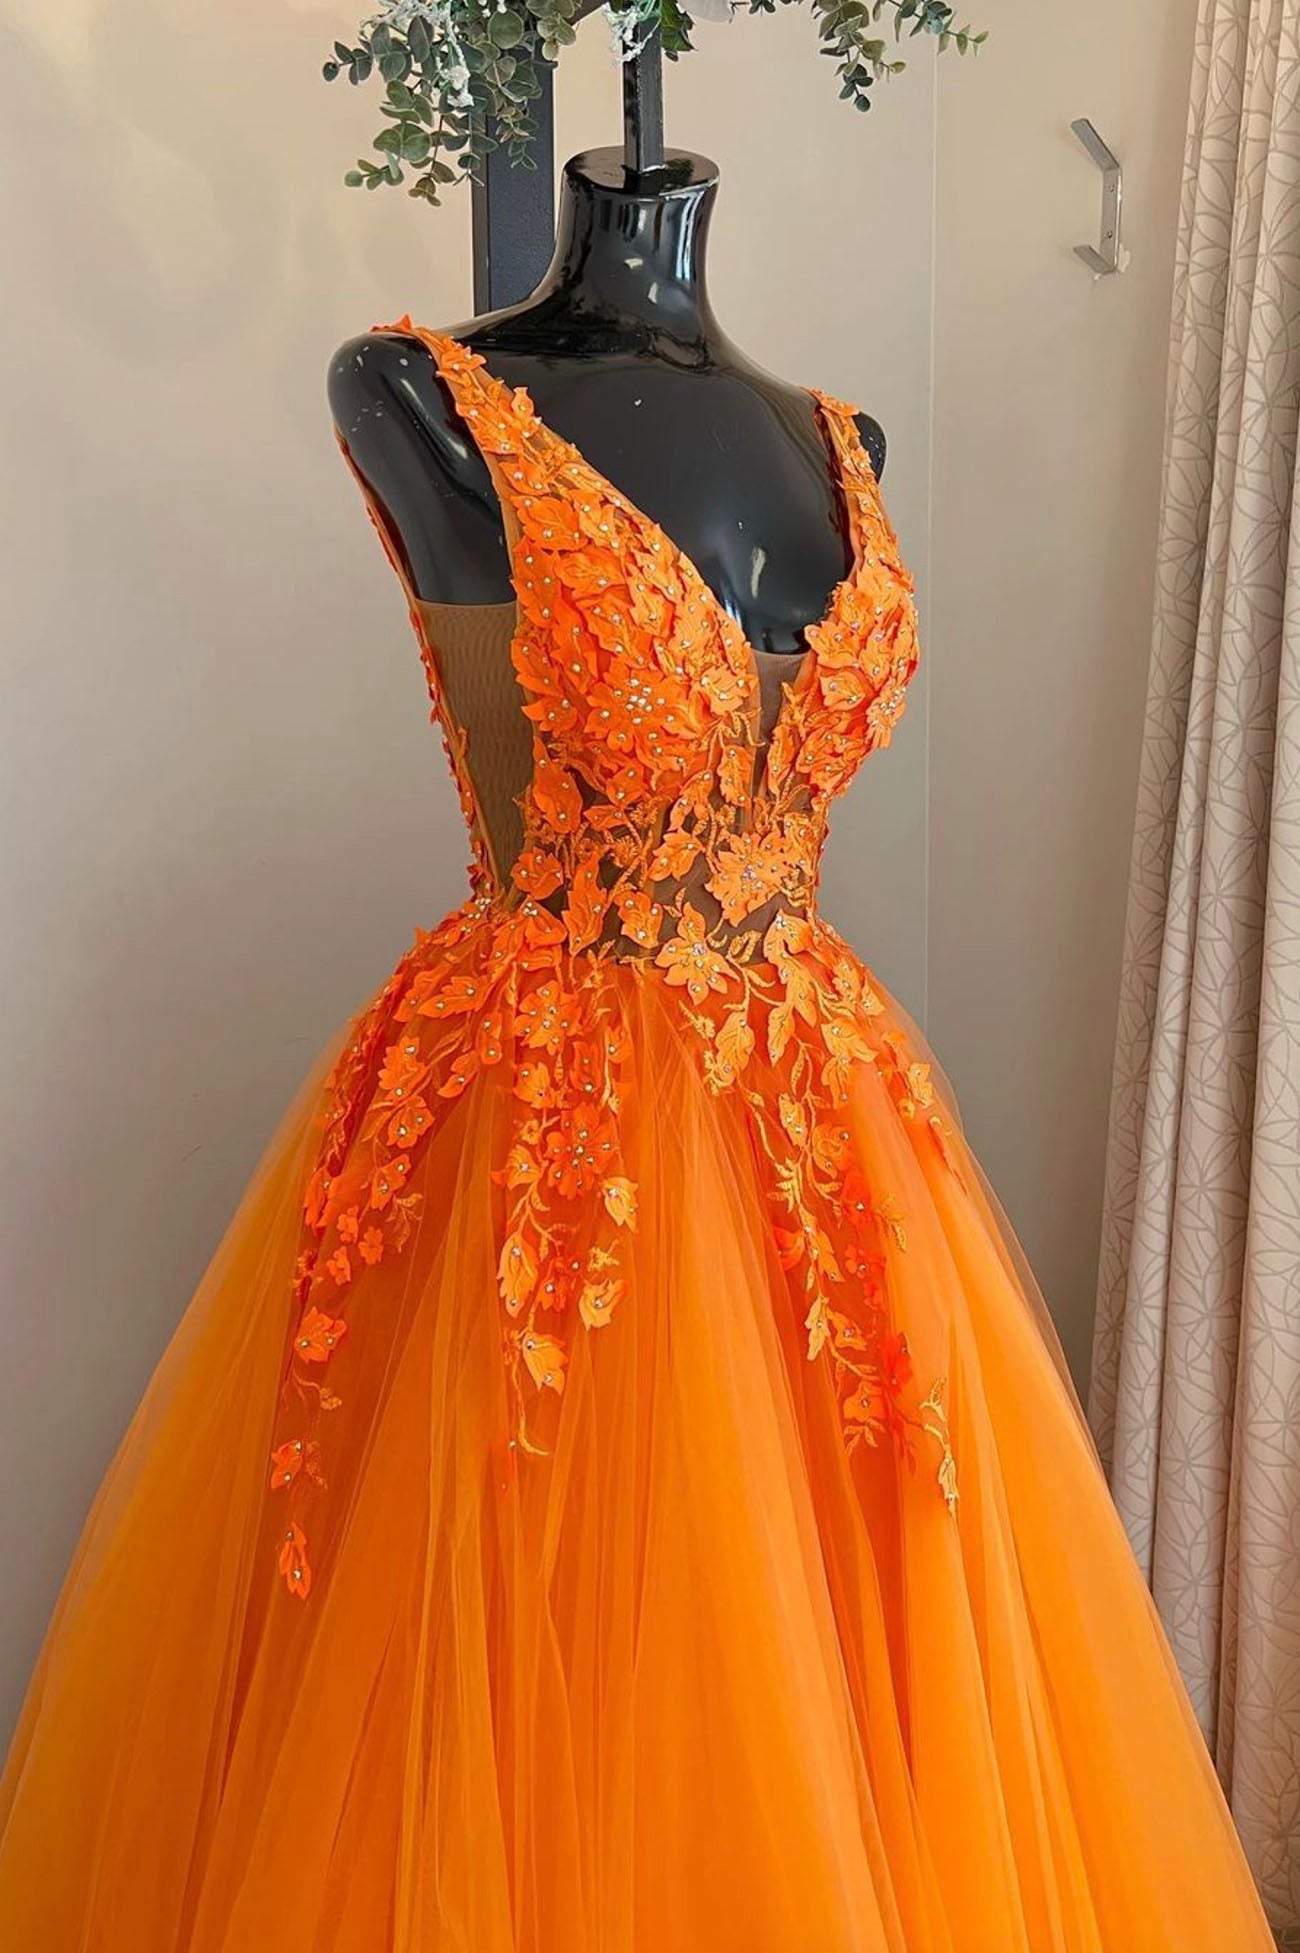 Party Dress For Teen, Orange V-Neck Tulle Lace Long Prom Dress, A-Line Backless Evening Dress